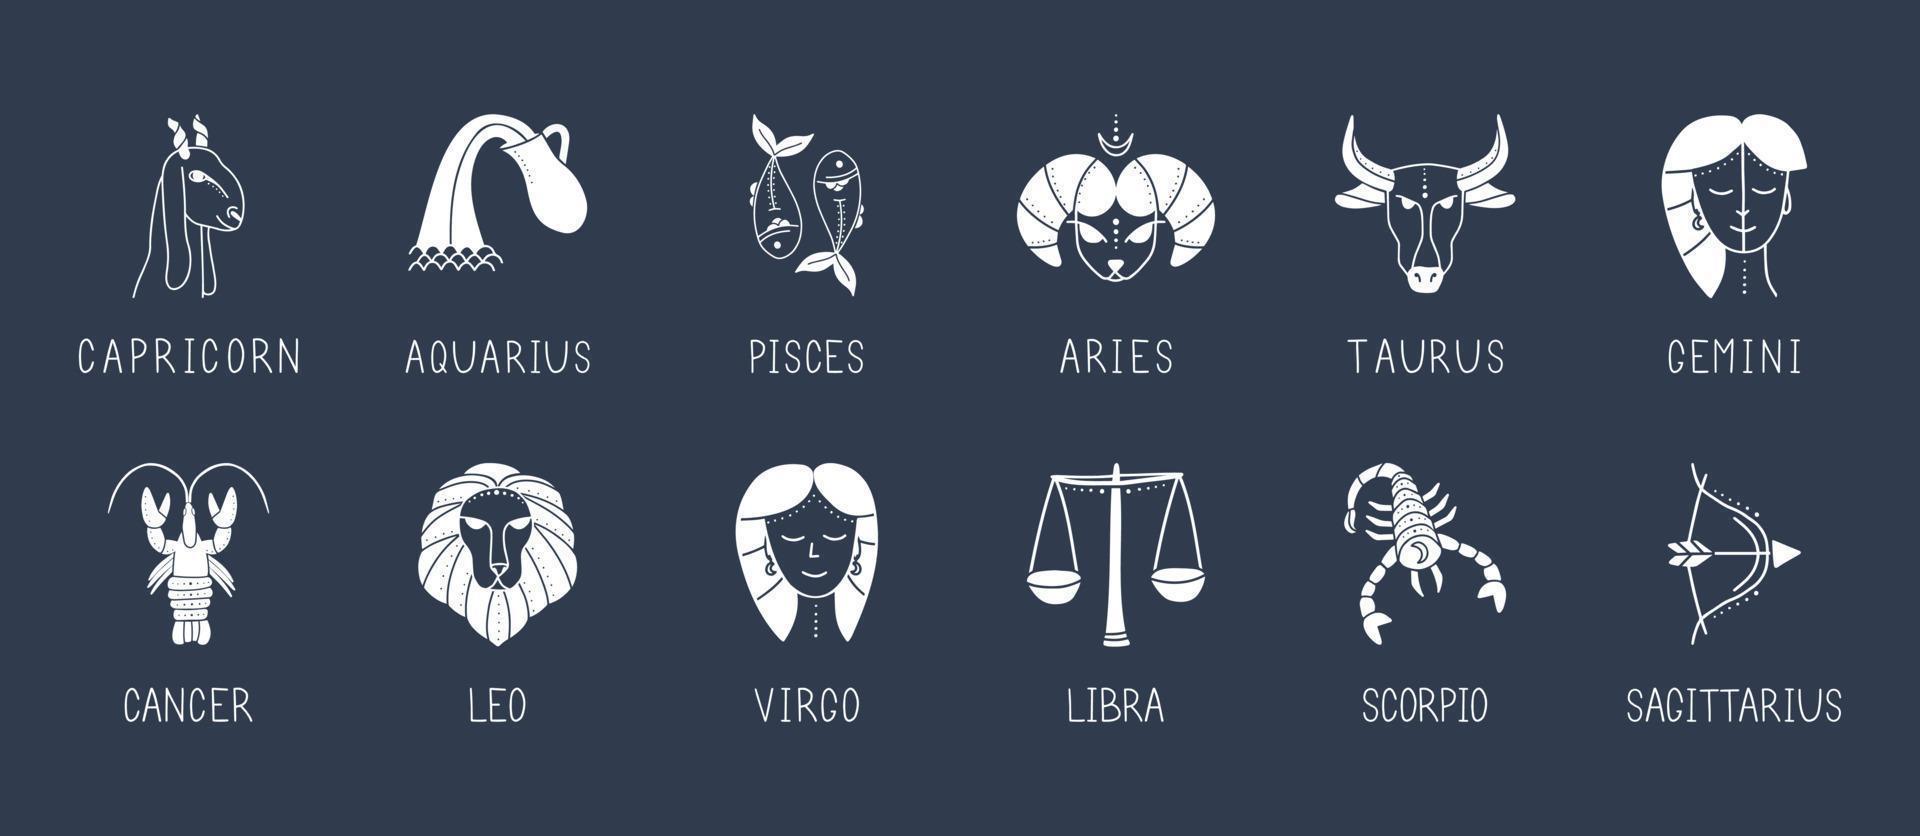 Vector set of zodiac signs. Symbols 12 signs with inscriptions on the blue sky. Vector images of zodiac signs for astrology and horoscopes.